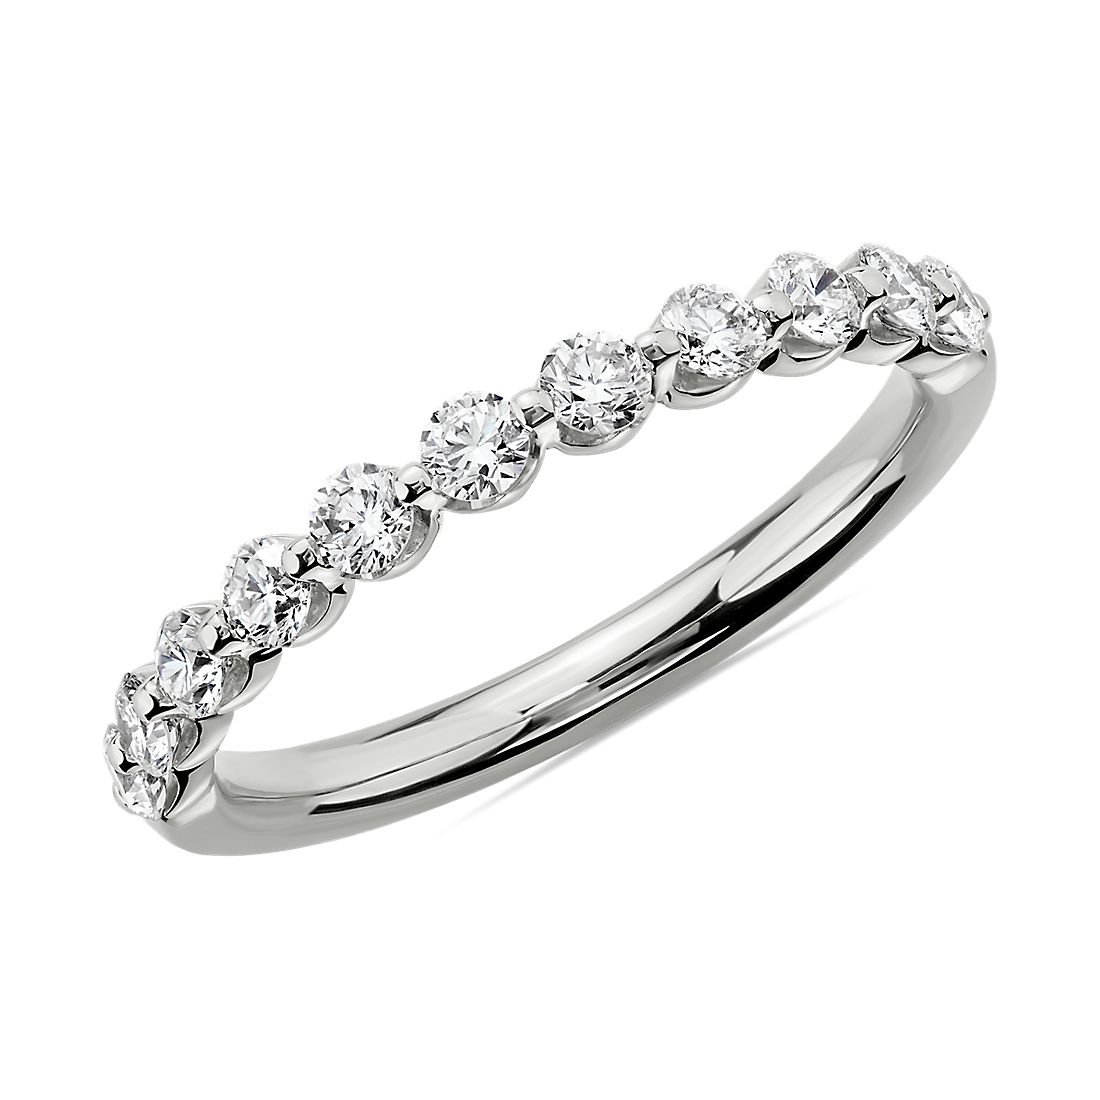 Customize and Engrave 1/2 cttw Diamond Wedding Band in 14K White Gold 9 Stones Prong Set